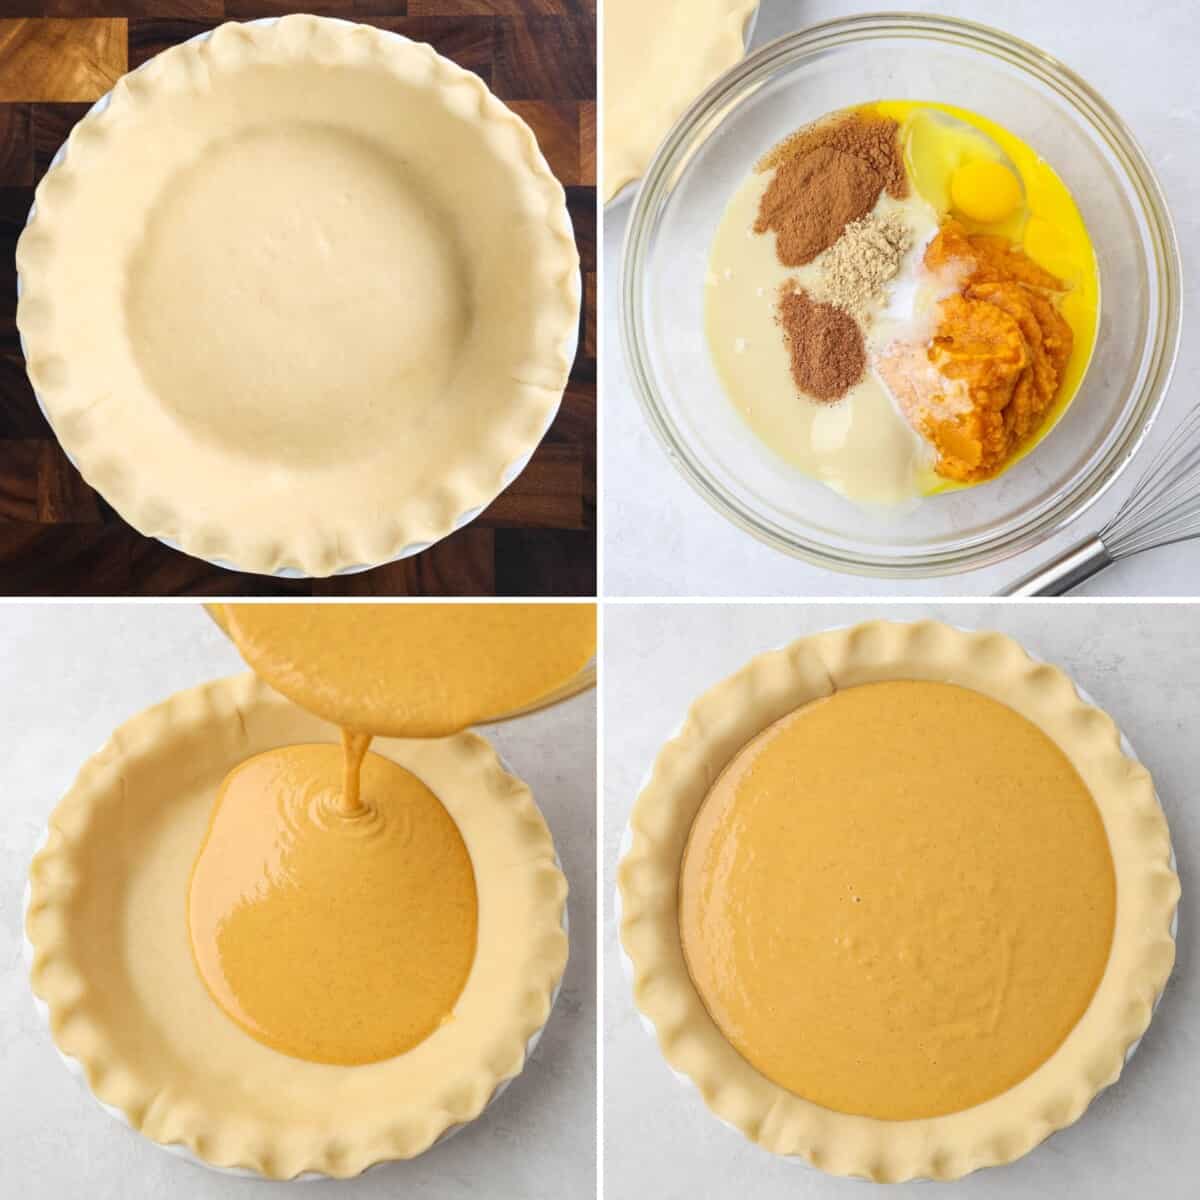 Photo collage of the process of making a pumpkin pie with an unbaked pie crust, raw ingredients in a glass bowl, pouring the pumpkin pie mix into th unbaked pie crust, and a whole unbaked pumpkin pie.